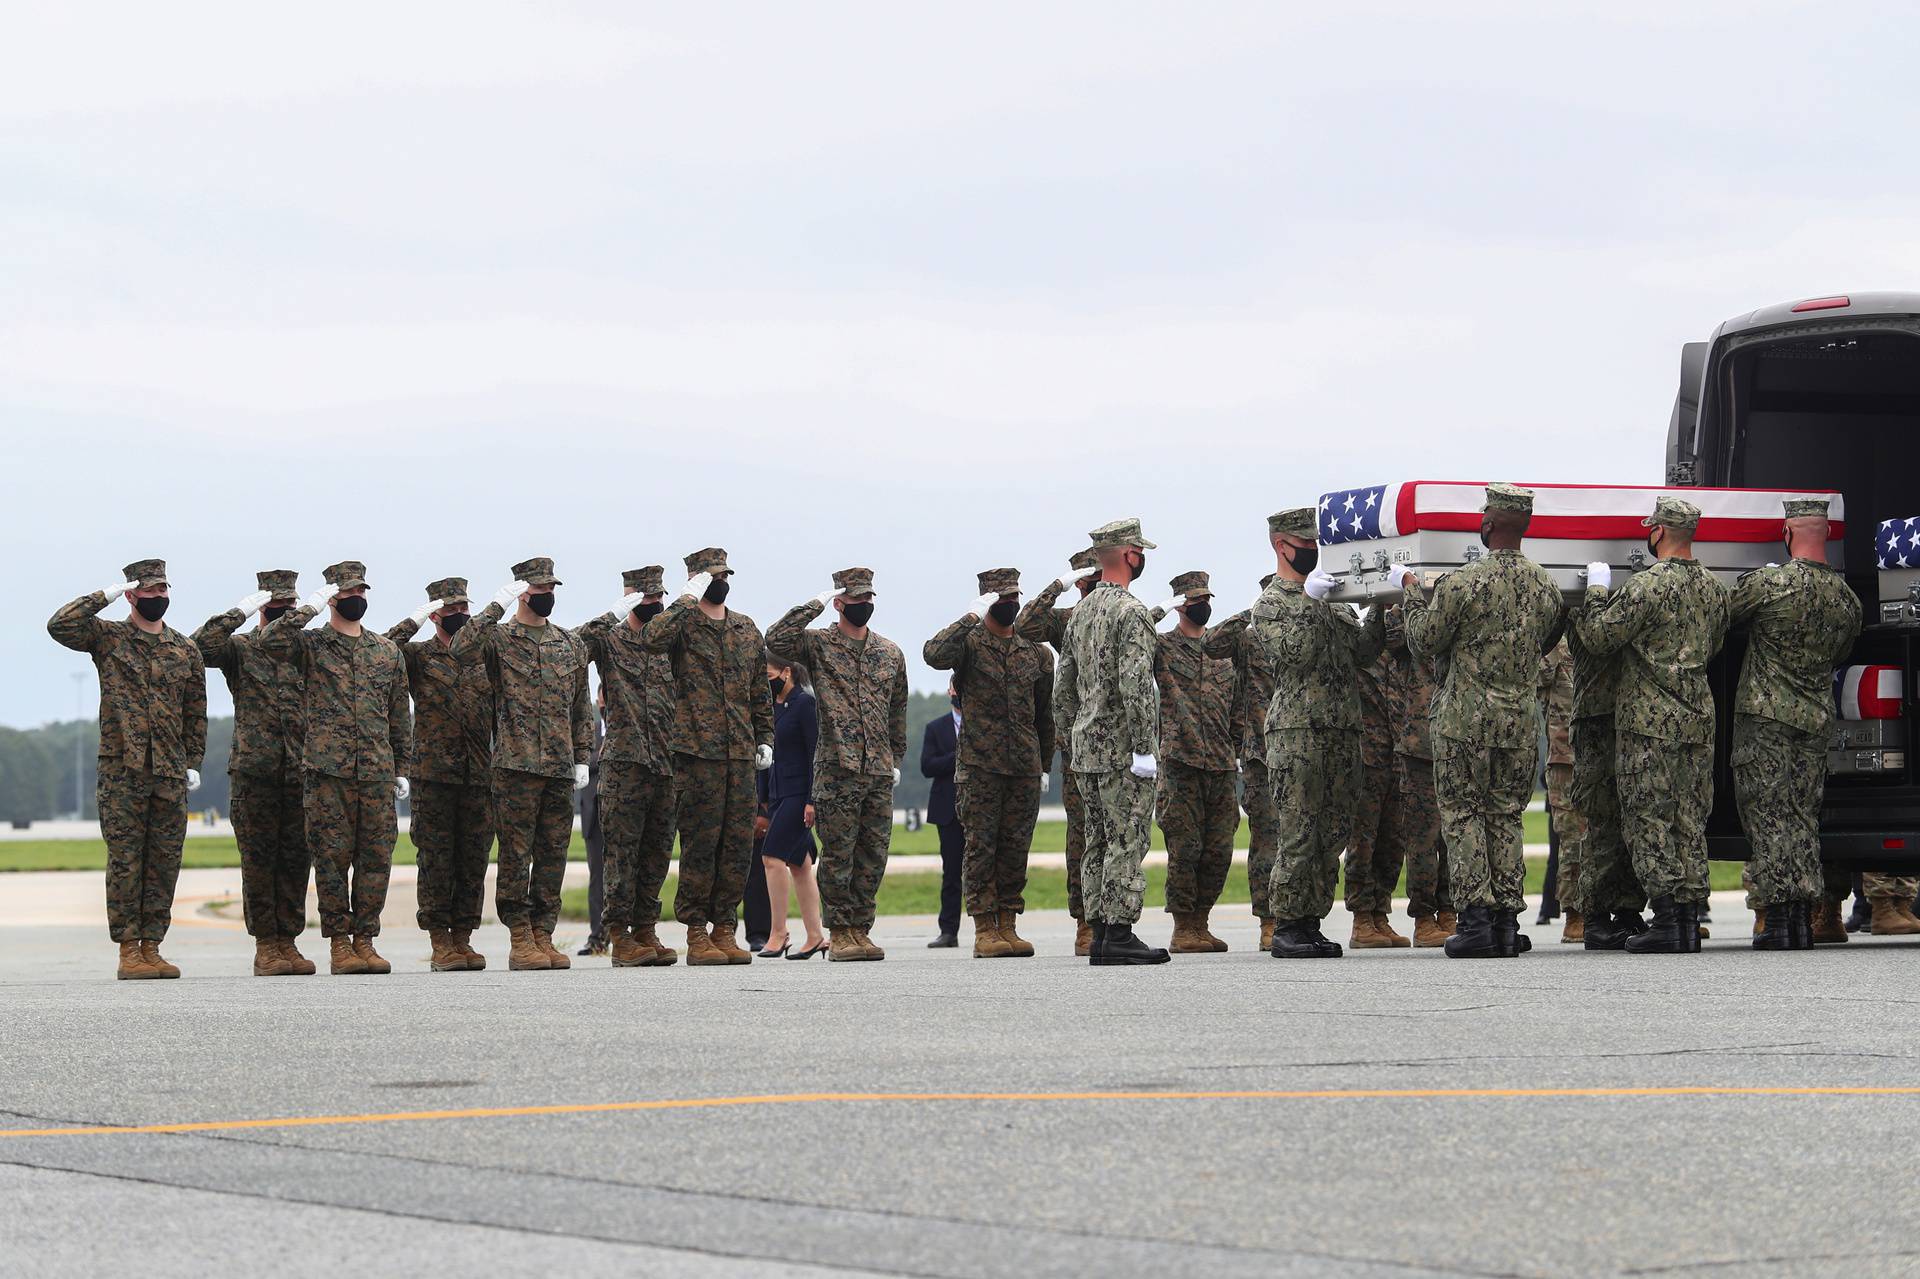 Dignified transfer of the remains of U.S. Military service members who were killed by a suicide bombing at the Hamid Karzai International Airport